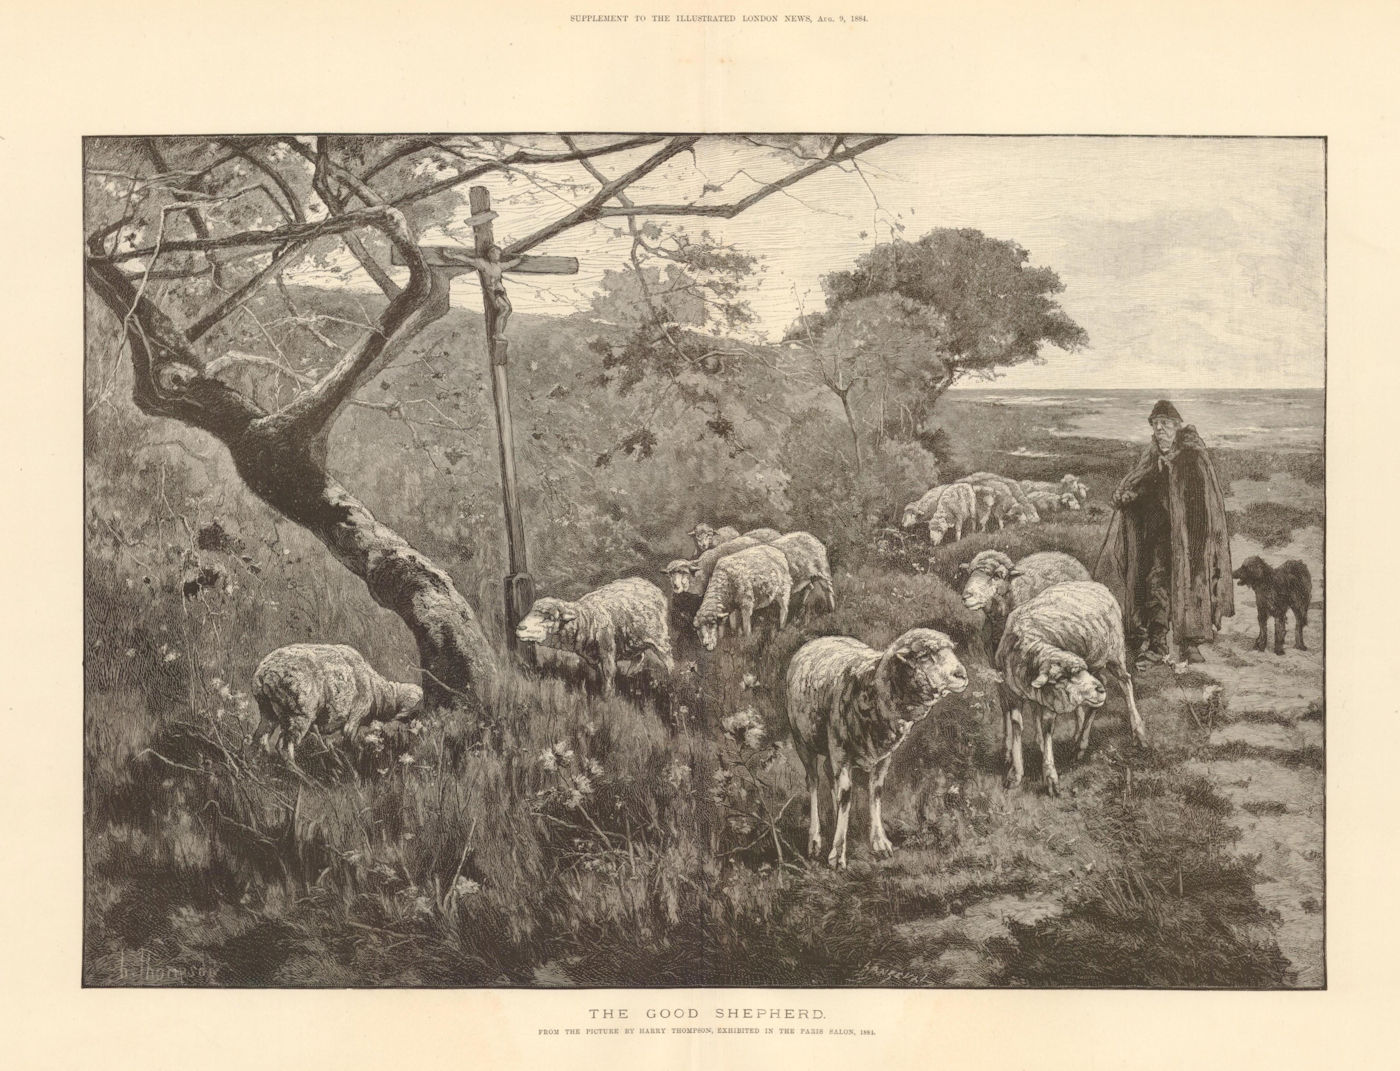 Associate Product The good shepherd. Sheep. Farming 1884 old antique vintage print picture